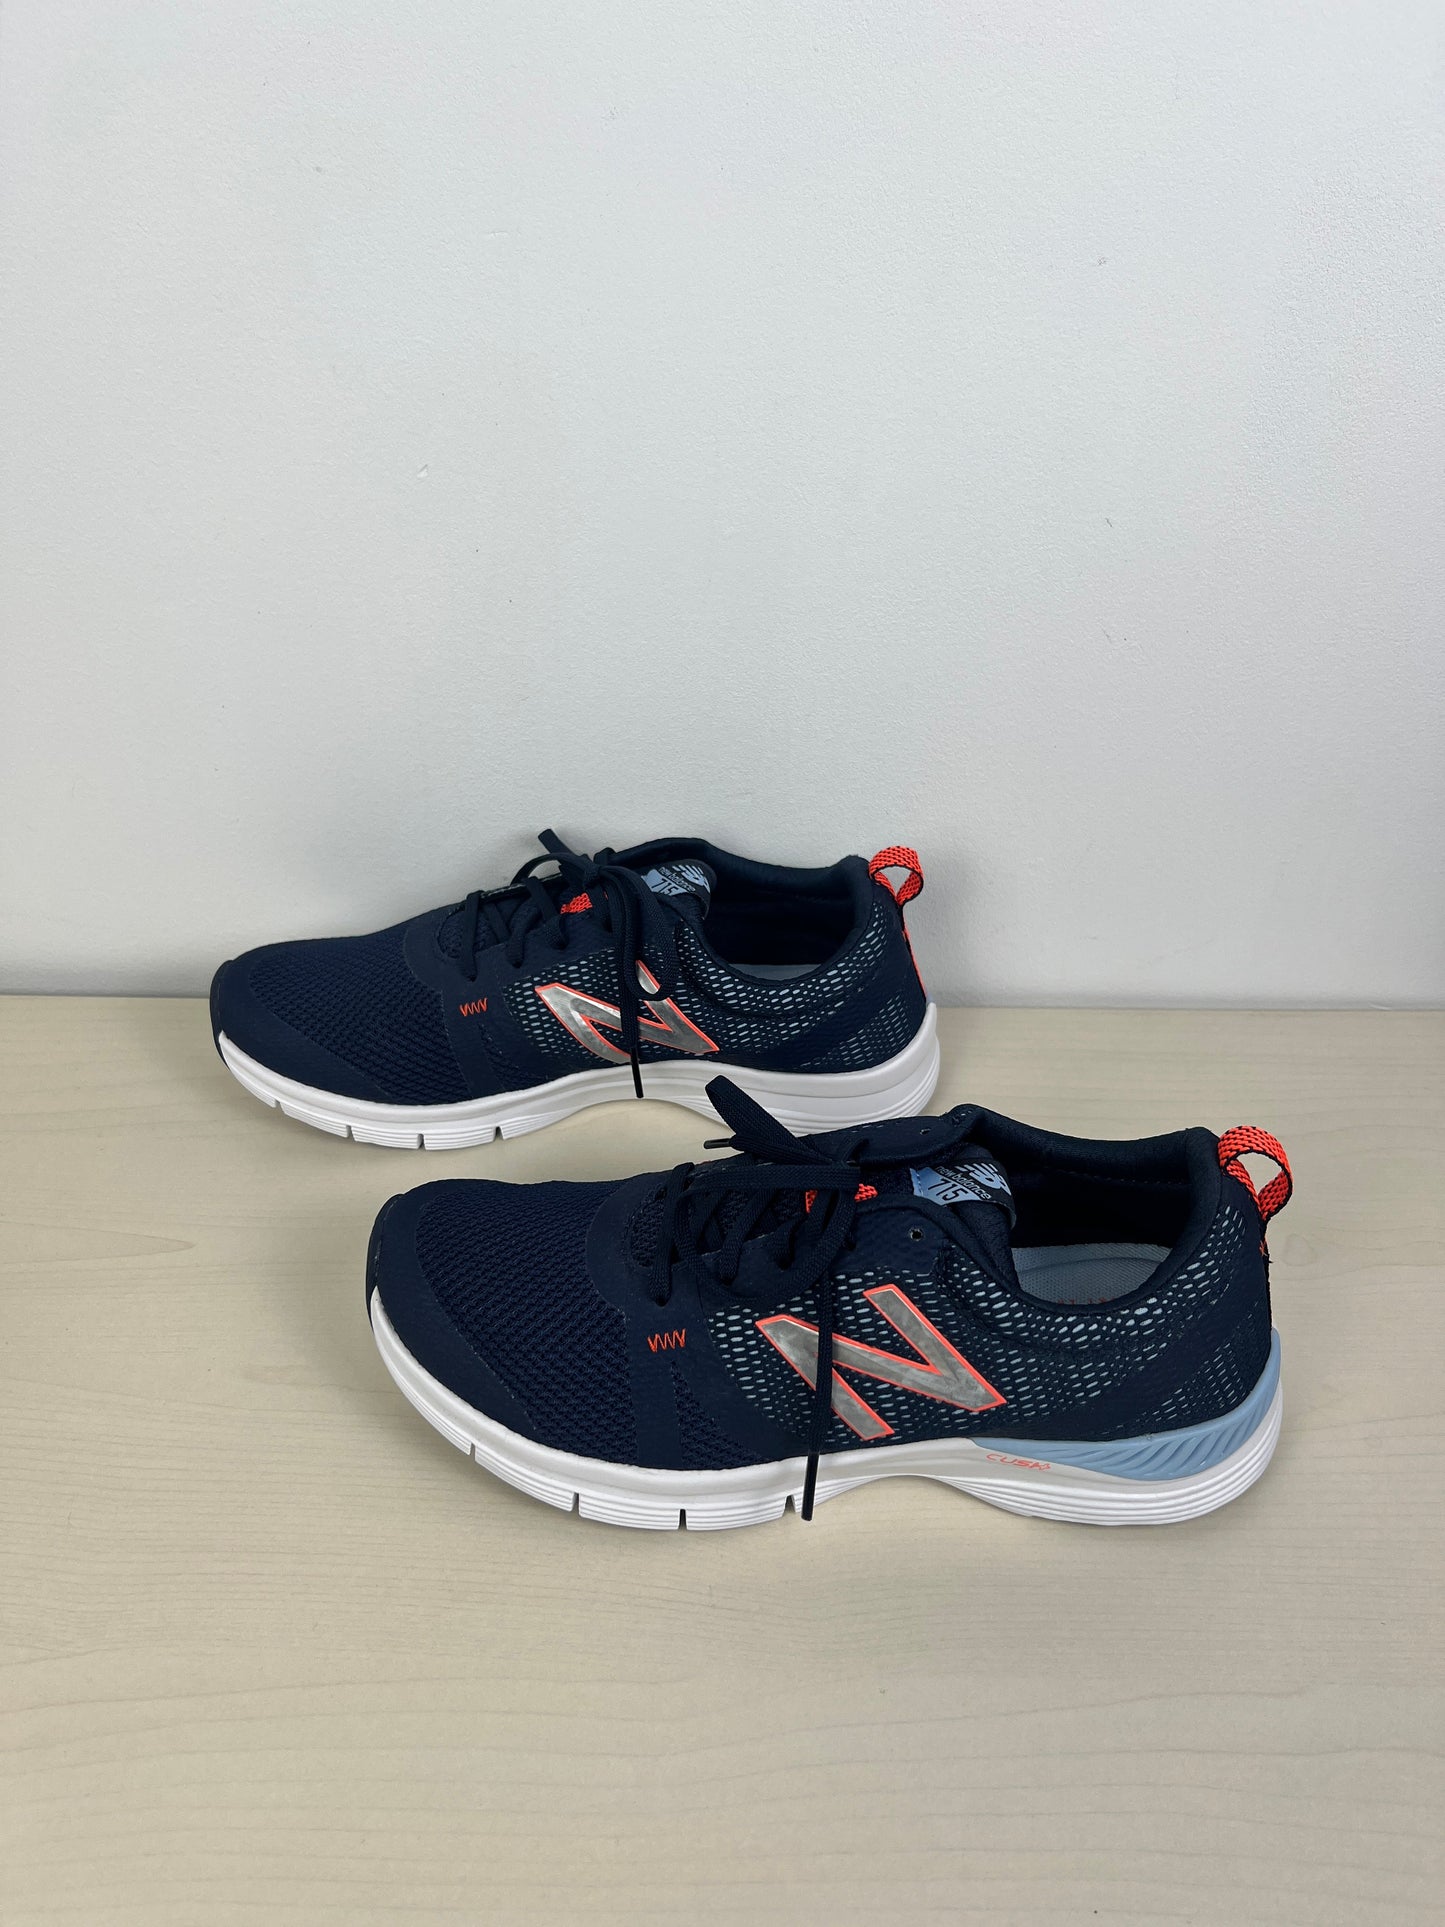 Shoes Athletic By New Balance  Size: 9